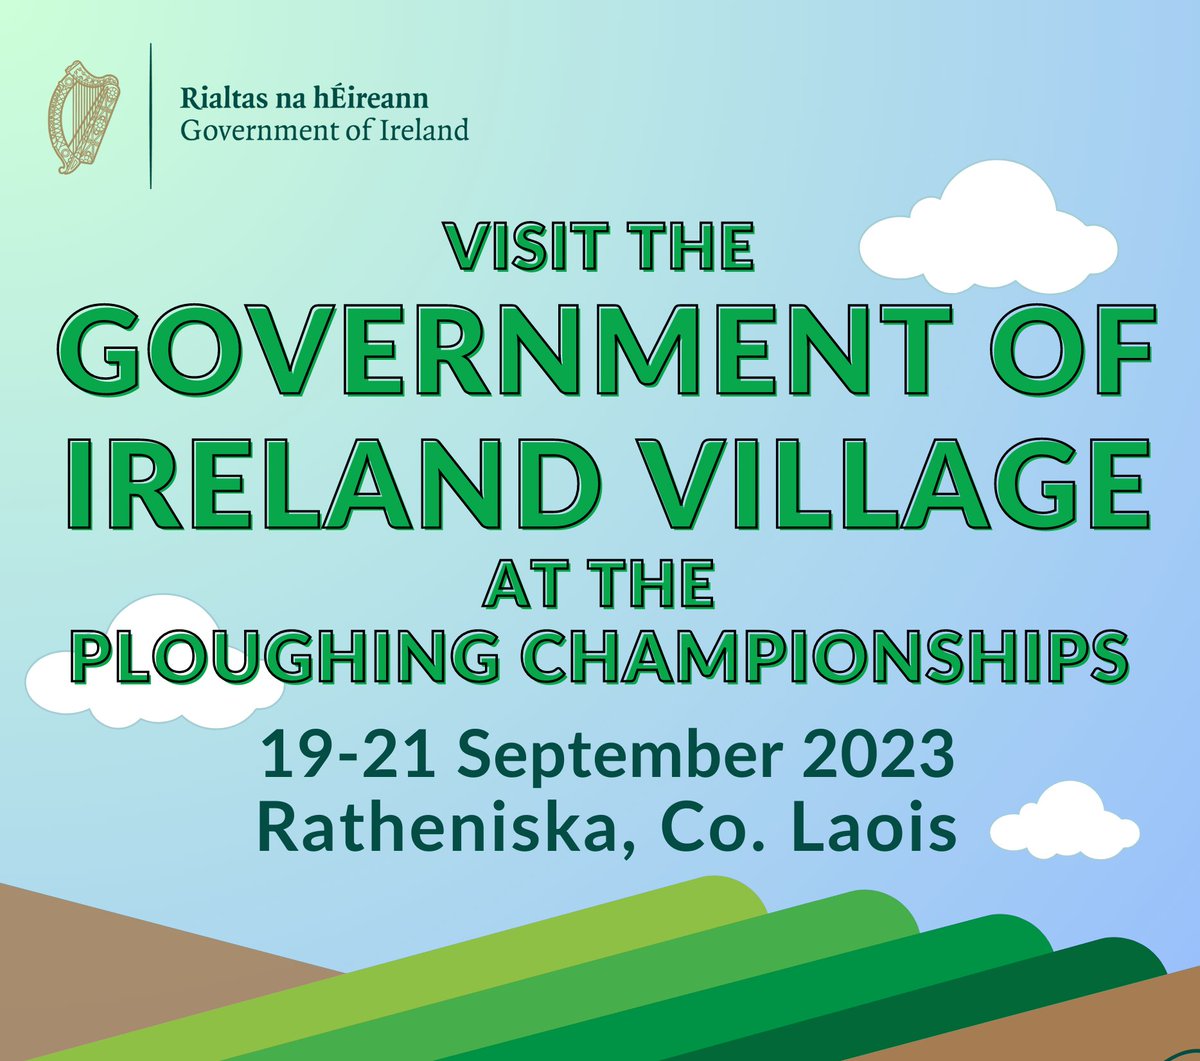 With just over a week until the National Ploughing Championships, we can't wait to meet everybody at Hub4a in the Government of Ireland Village. Call in for our client career sessions to find out more about a career for you in the civil and public service #CareersThatMatter